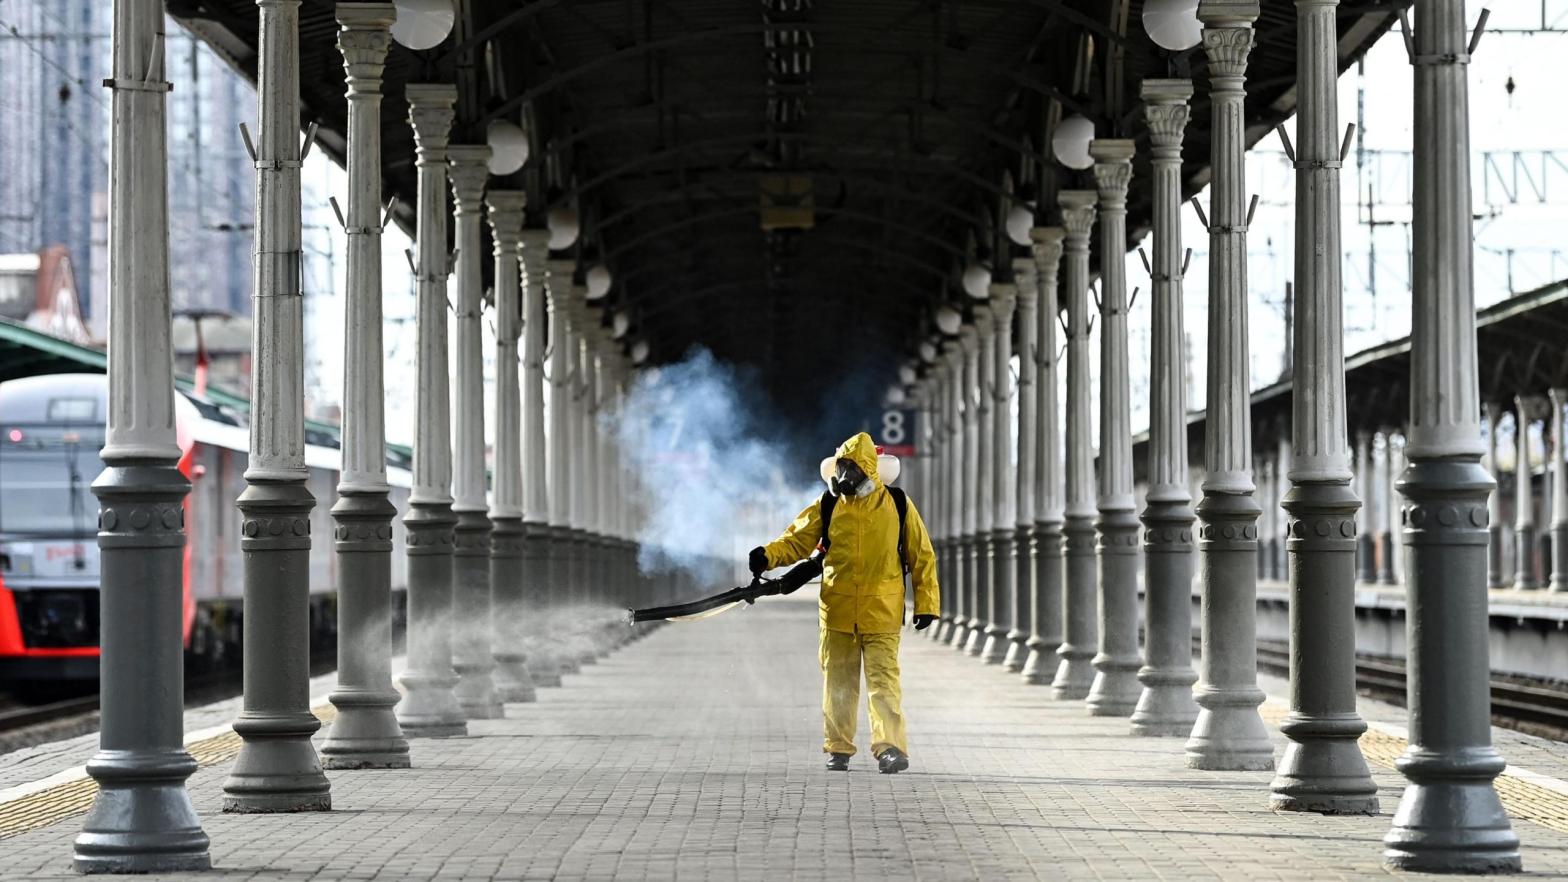 A serviceman of Russia's Emergencies Ministry wearing protective gear disinfects Moscow's Belorussky railway station on October 20, 2021. (Photo: Kirill Kudryavtsev/AFP, Getty Images)